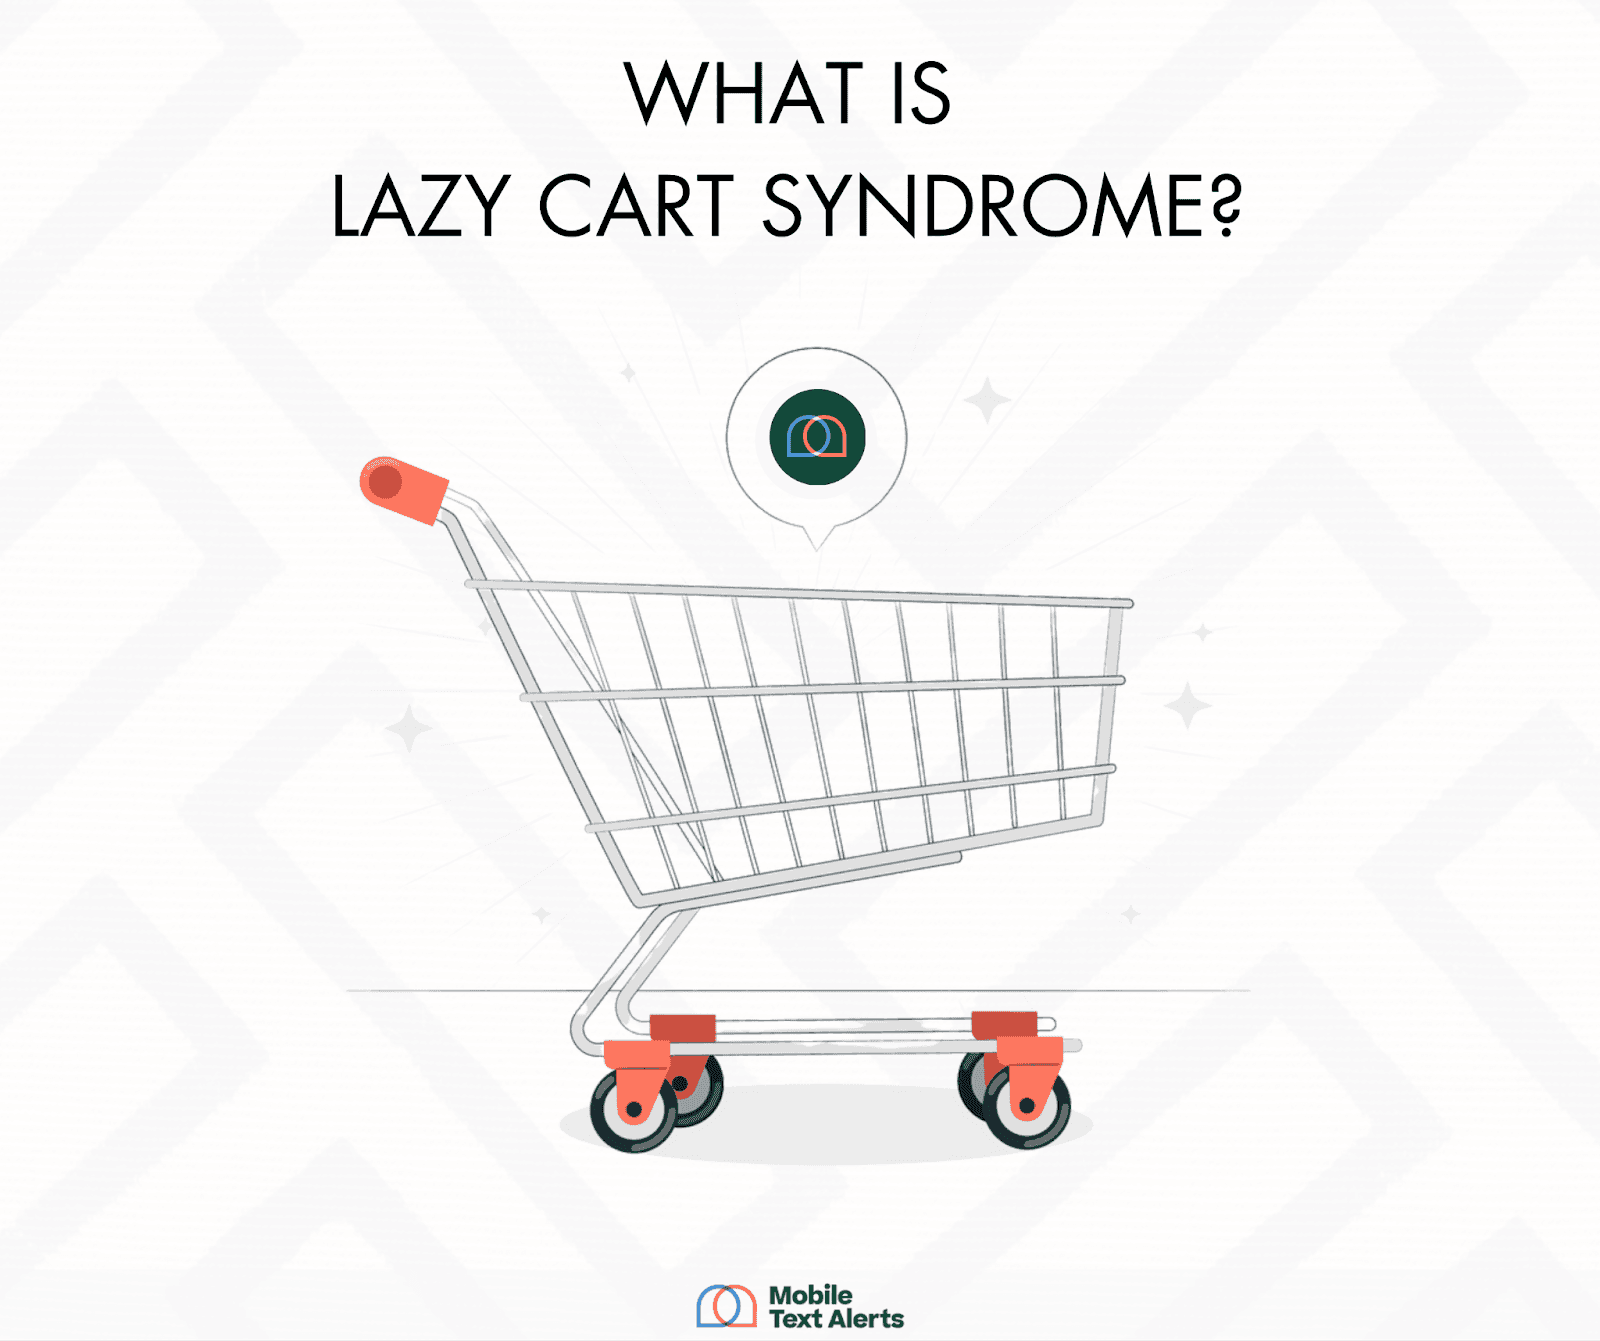 What Is Lazy Cart Syndrome?